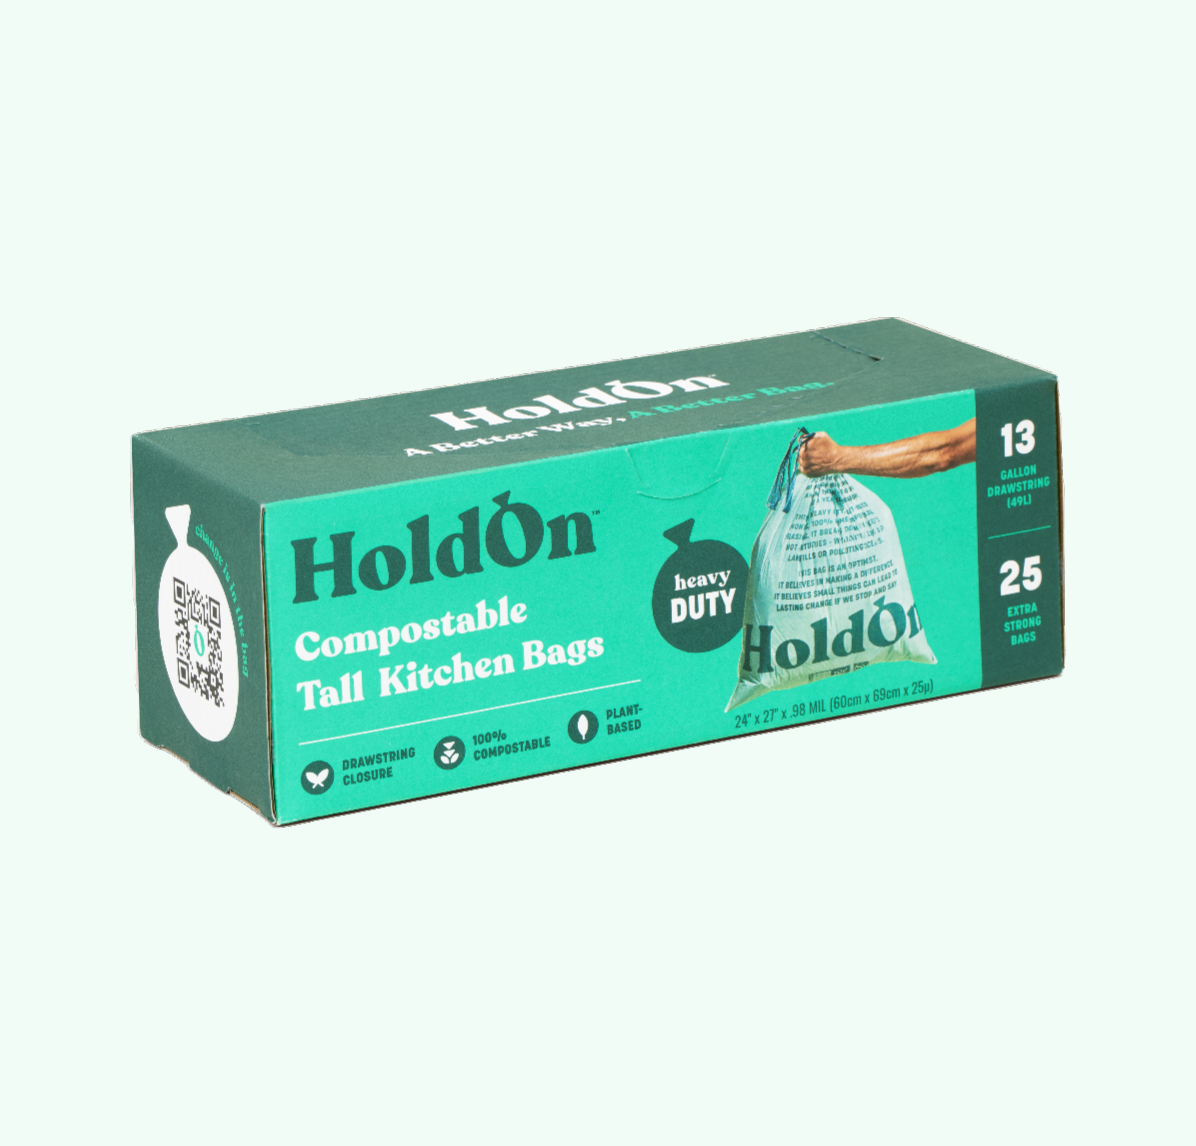 Holdon Bags Inc: A sustainable, household goods company that sells